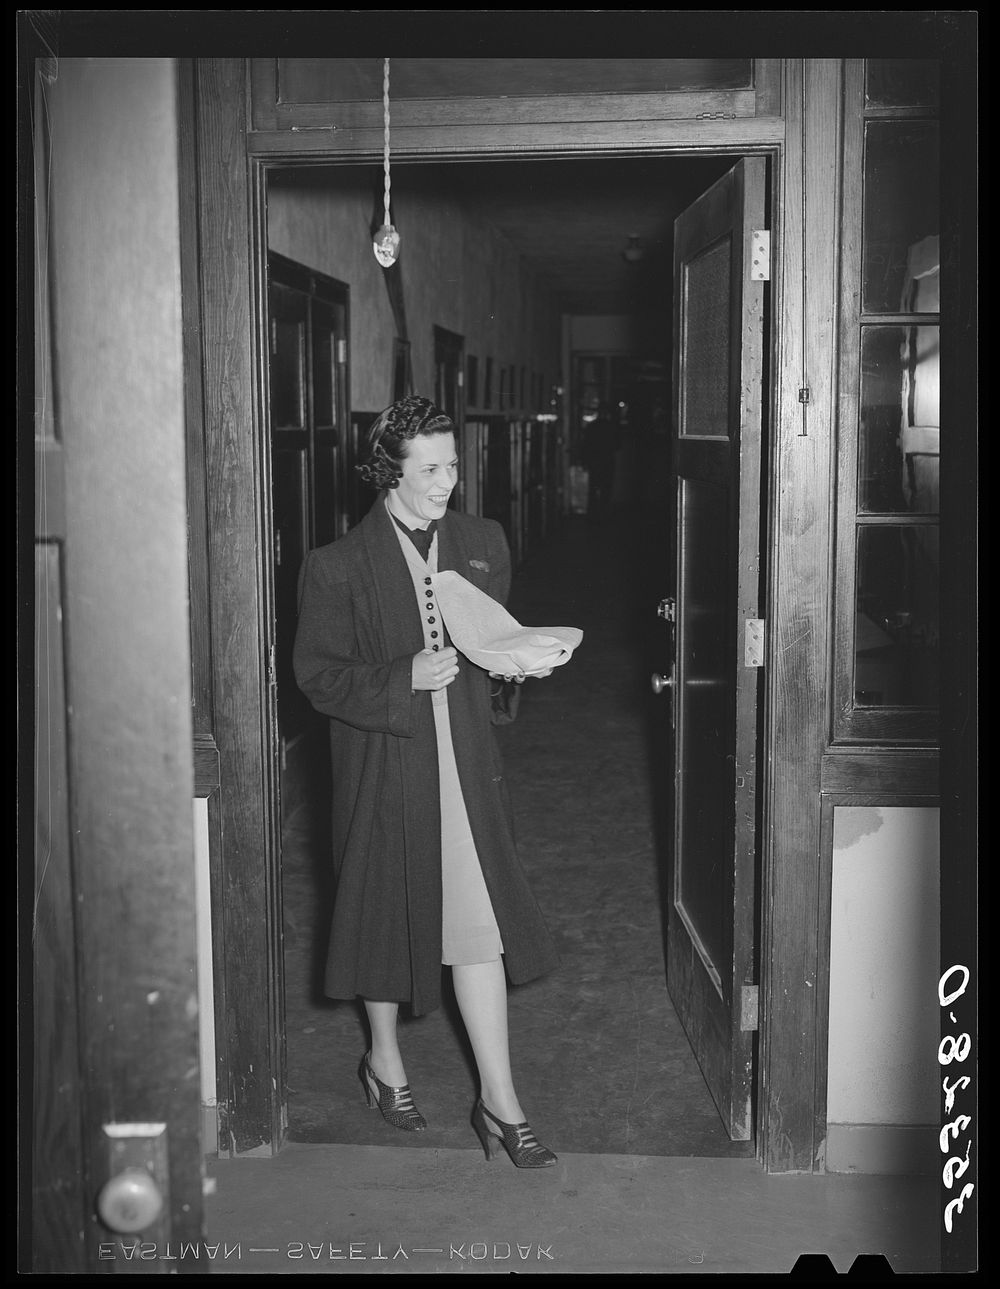 Wife of Jaycee member bringing food to the buffet supper at the high school. Eufaula, Oklahoma. See general caption 25 by…